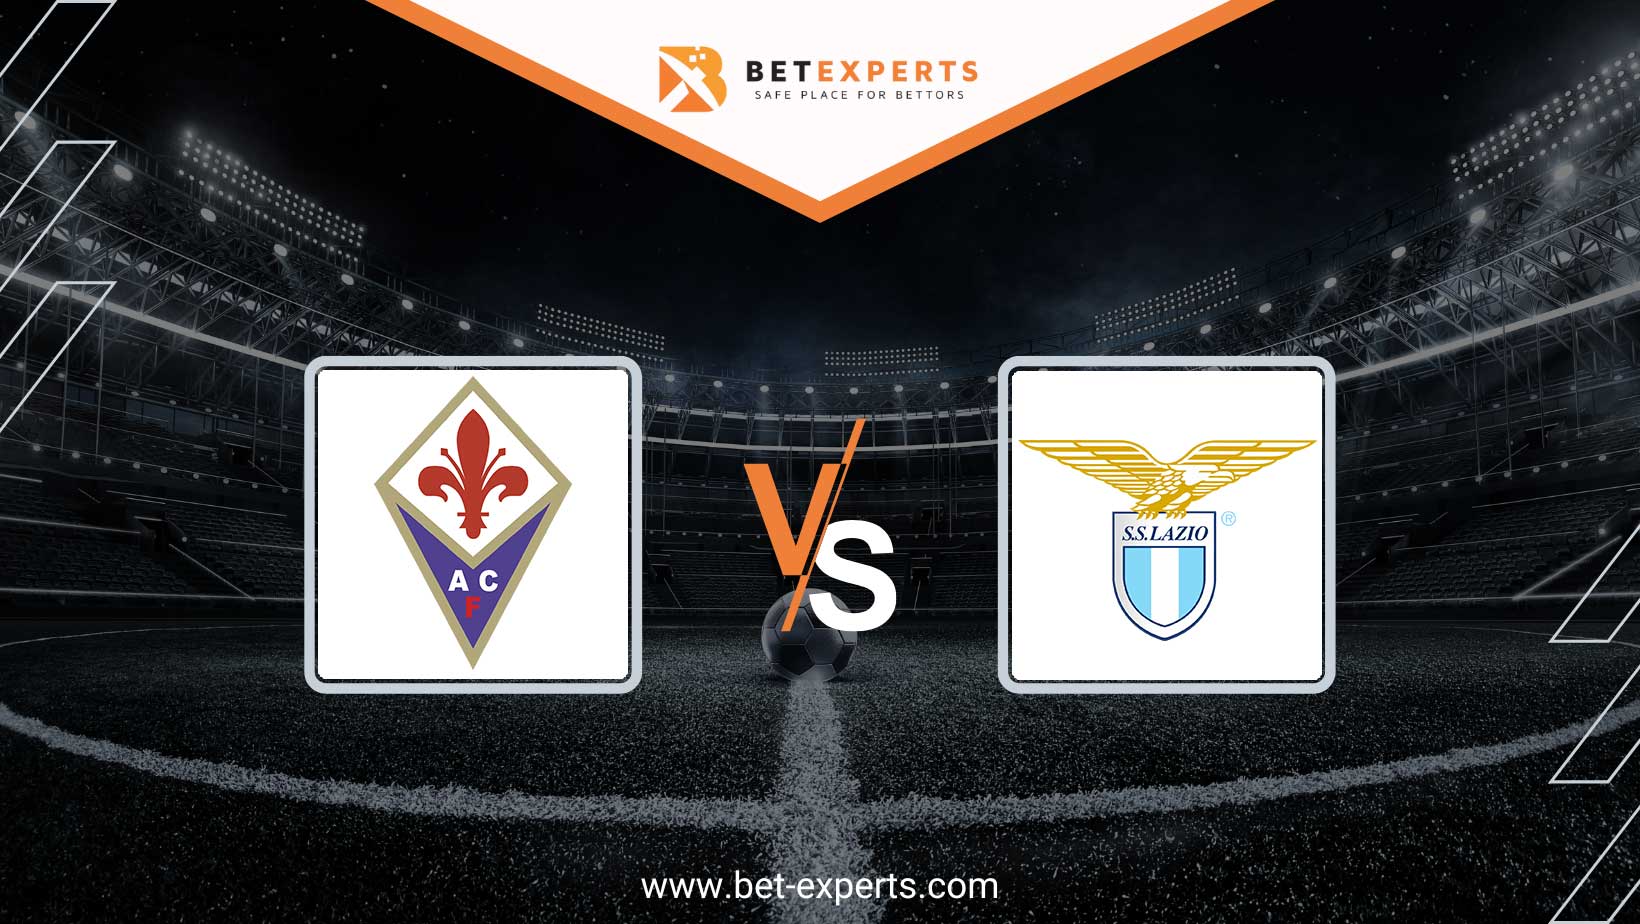 Fiorentina-lazio betting expert sports non cash investing and financing transactions definition of love